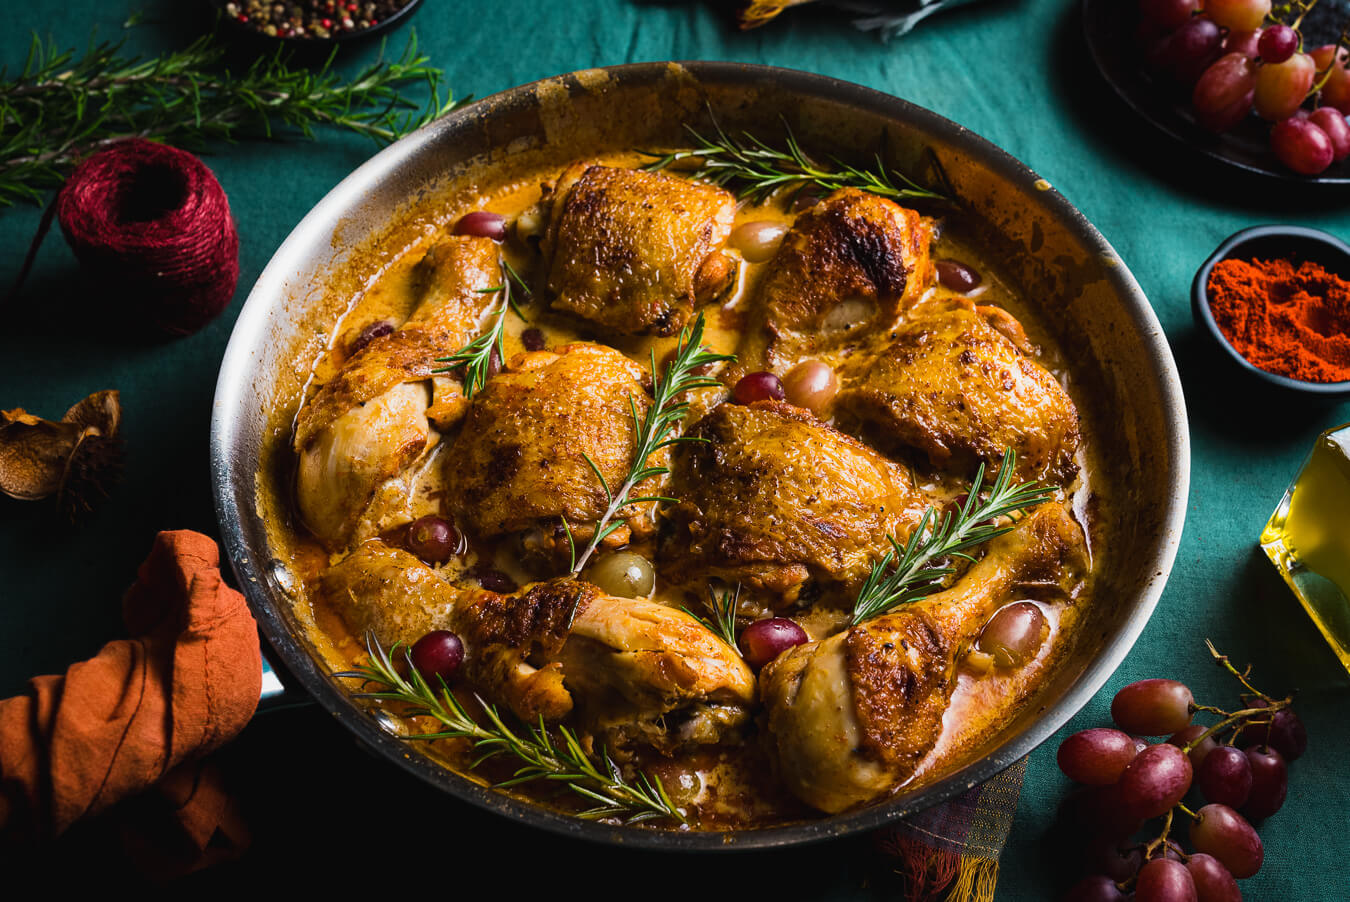 chicken in white wine sauce with grapes and rosemary